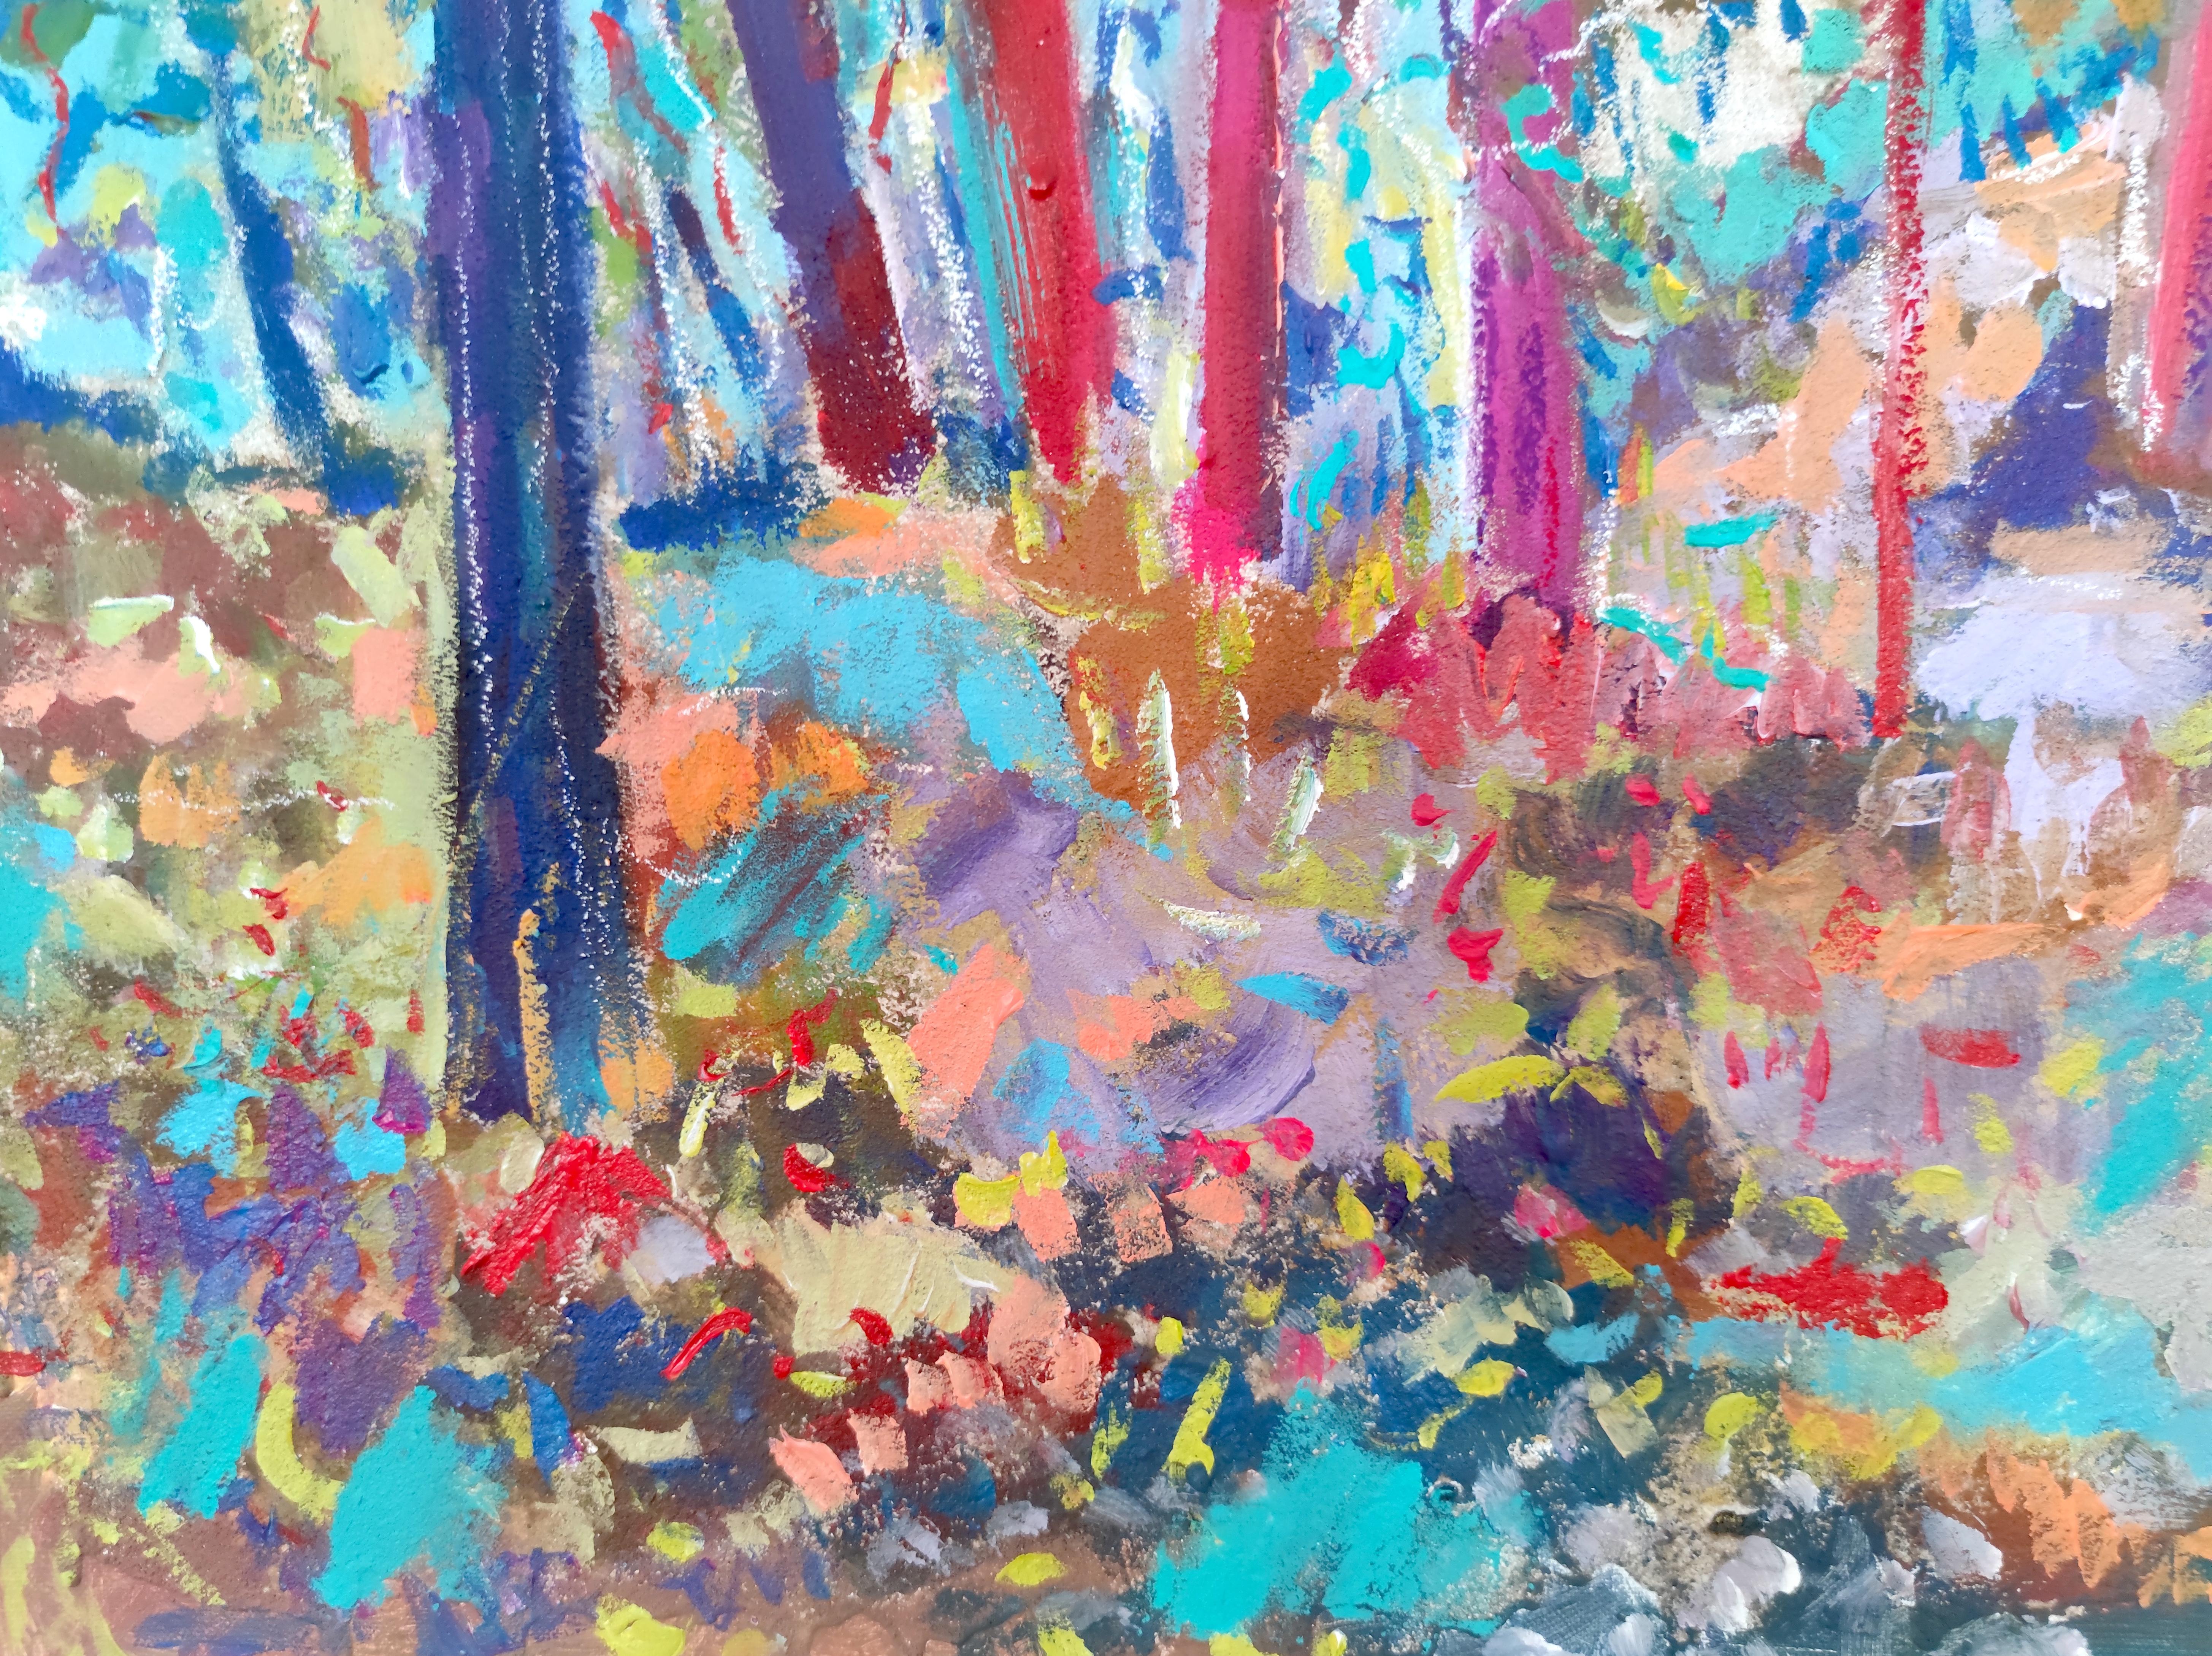 This series of paintings is inspired by the relationship between the artist and the forest of Fontainebleau. Every day, the artist goes there to make sketches, to walk, to dialogue with the forest. The initial sketches are made on the spot in